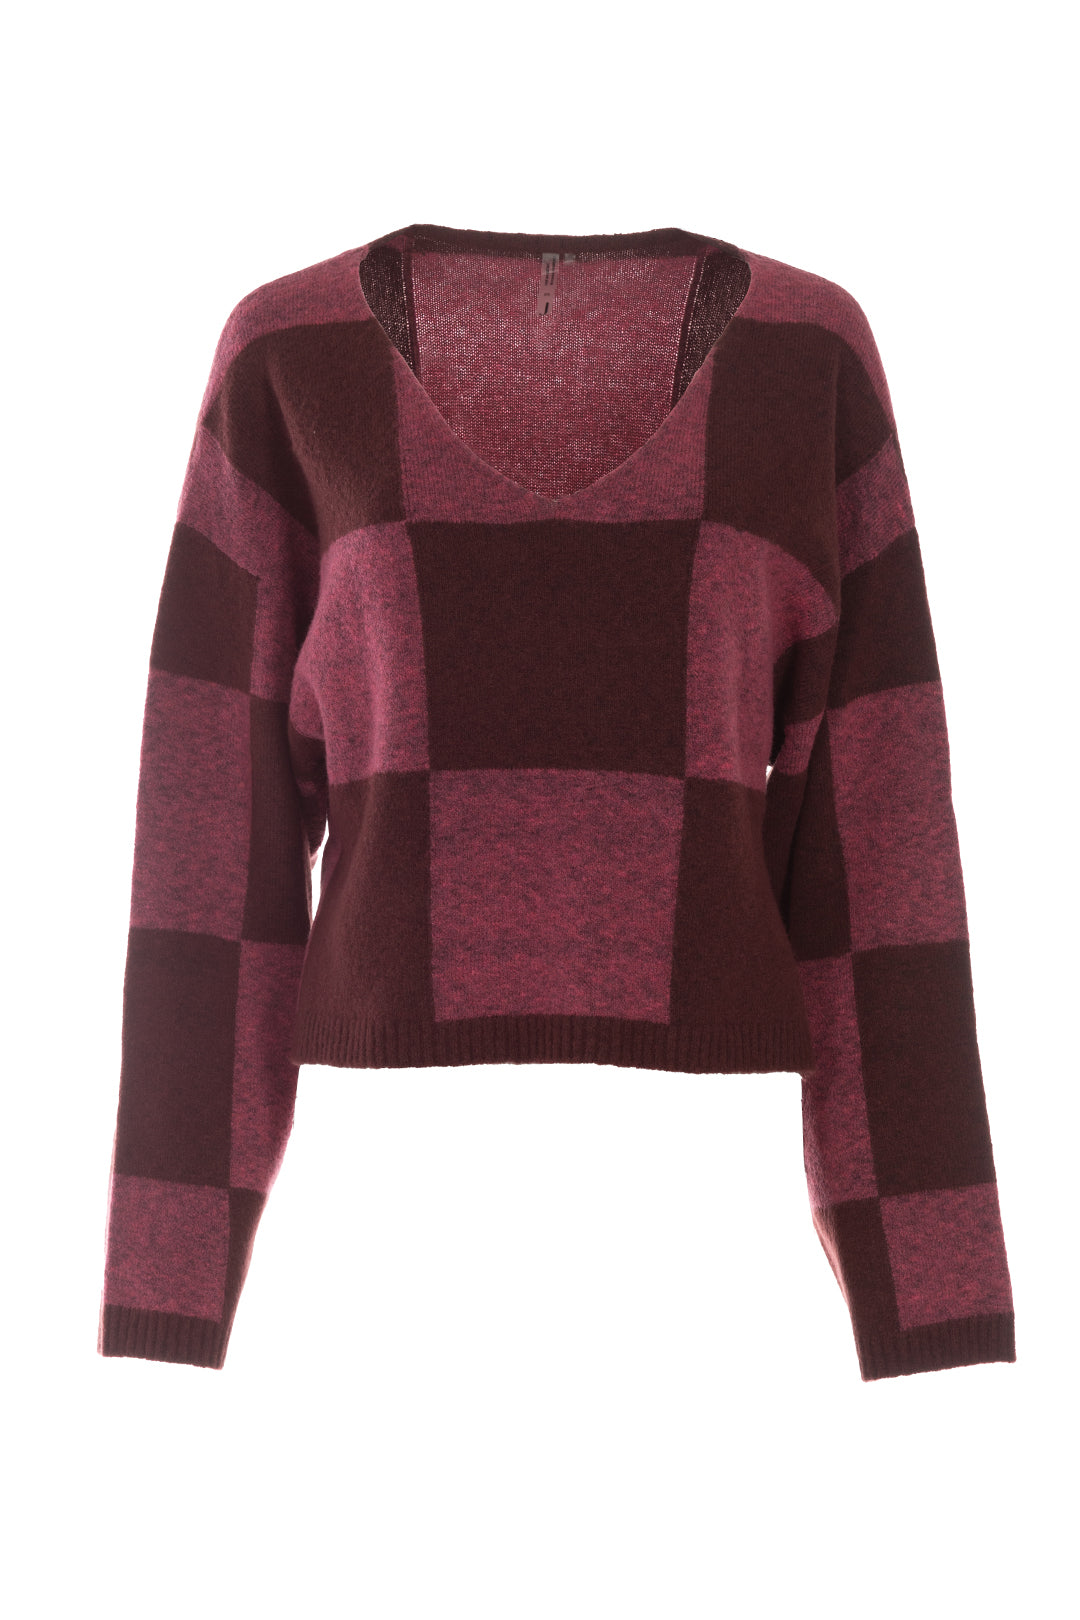 Pink and Red Plaid Knit Sweater | Check